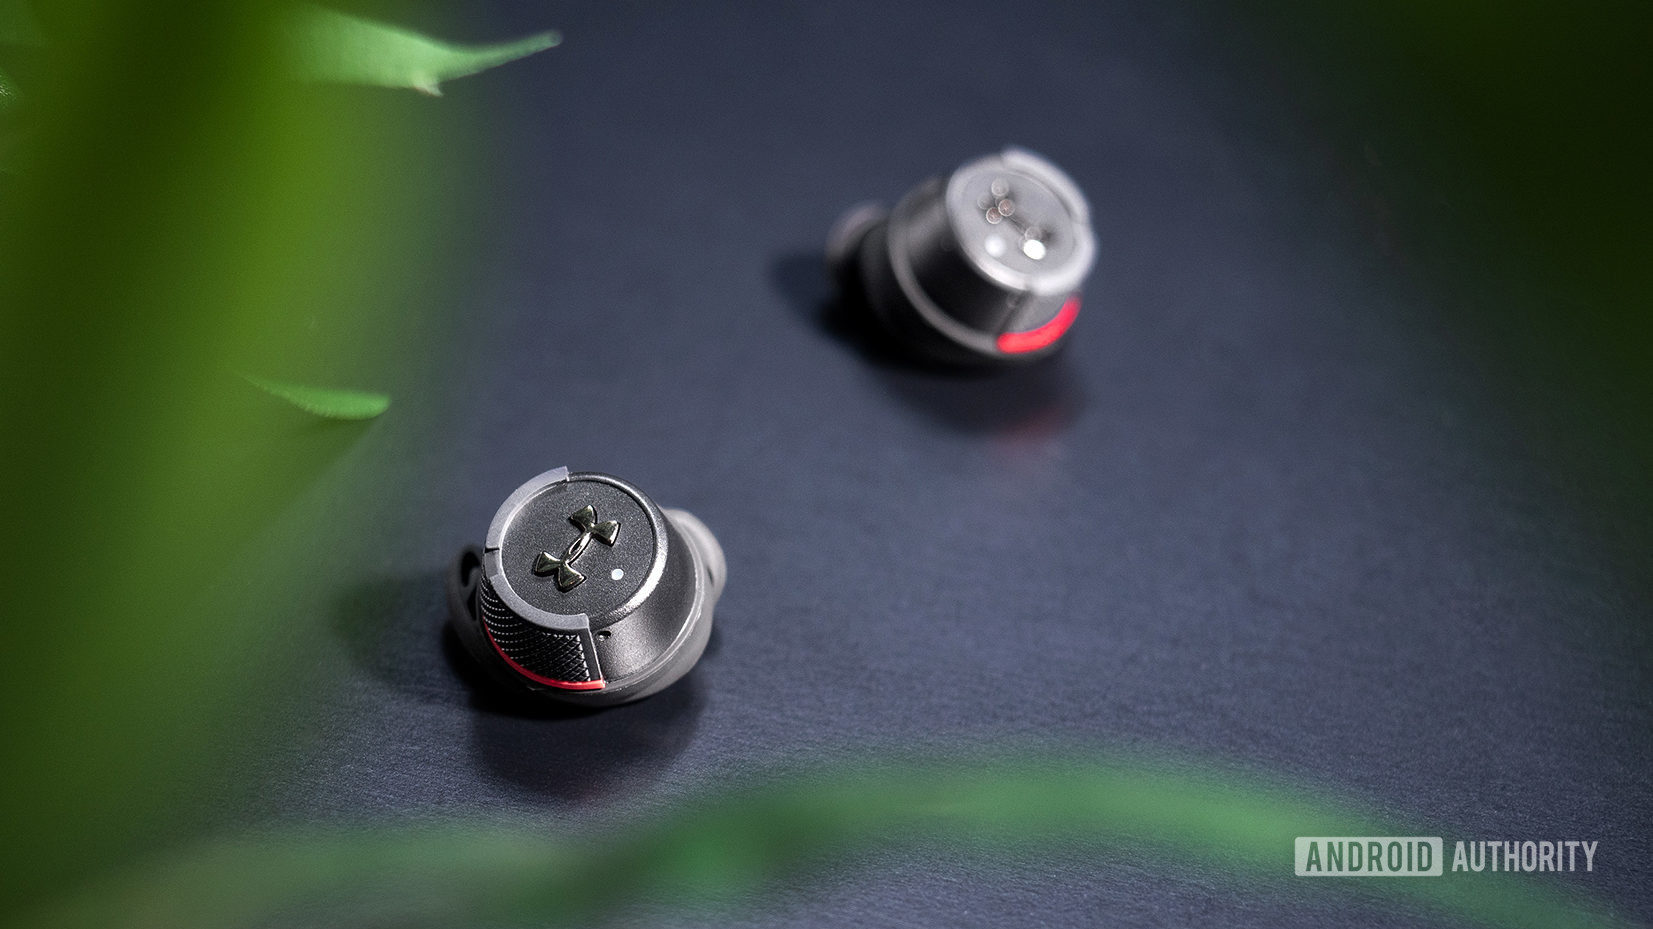 Under Armour True Wireless Flash JBL: Solo image of the earbuds on a black table.